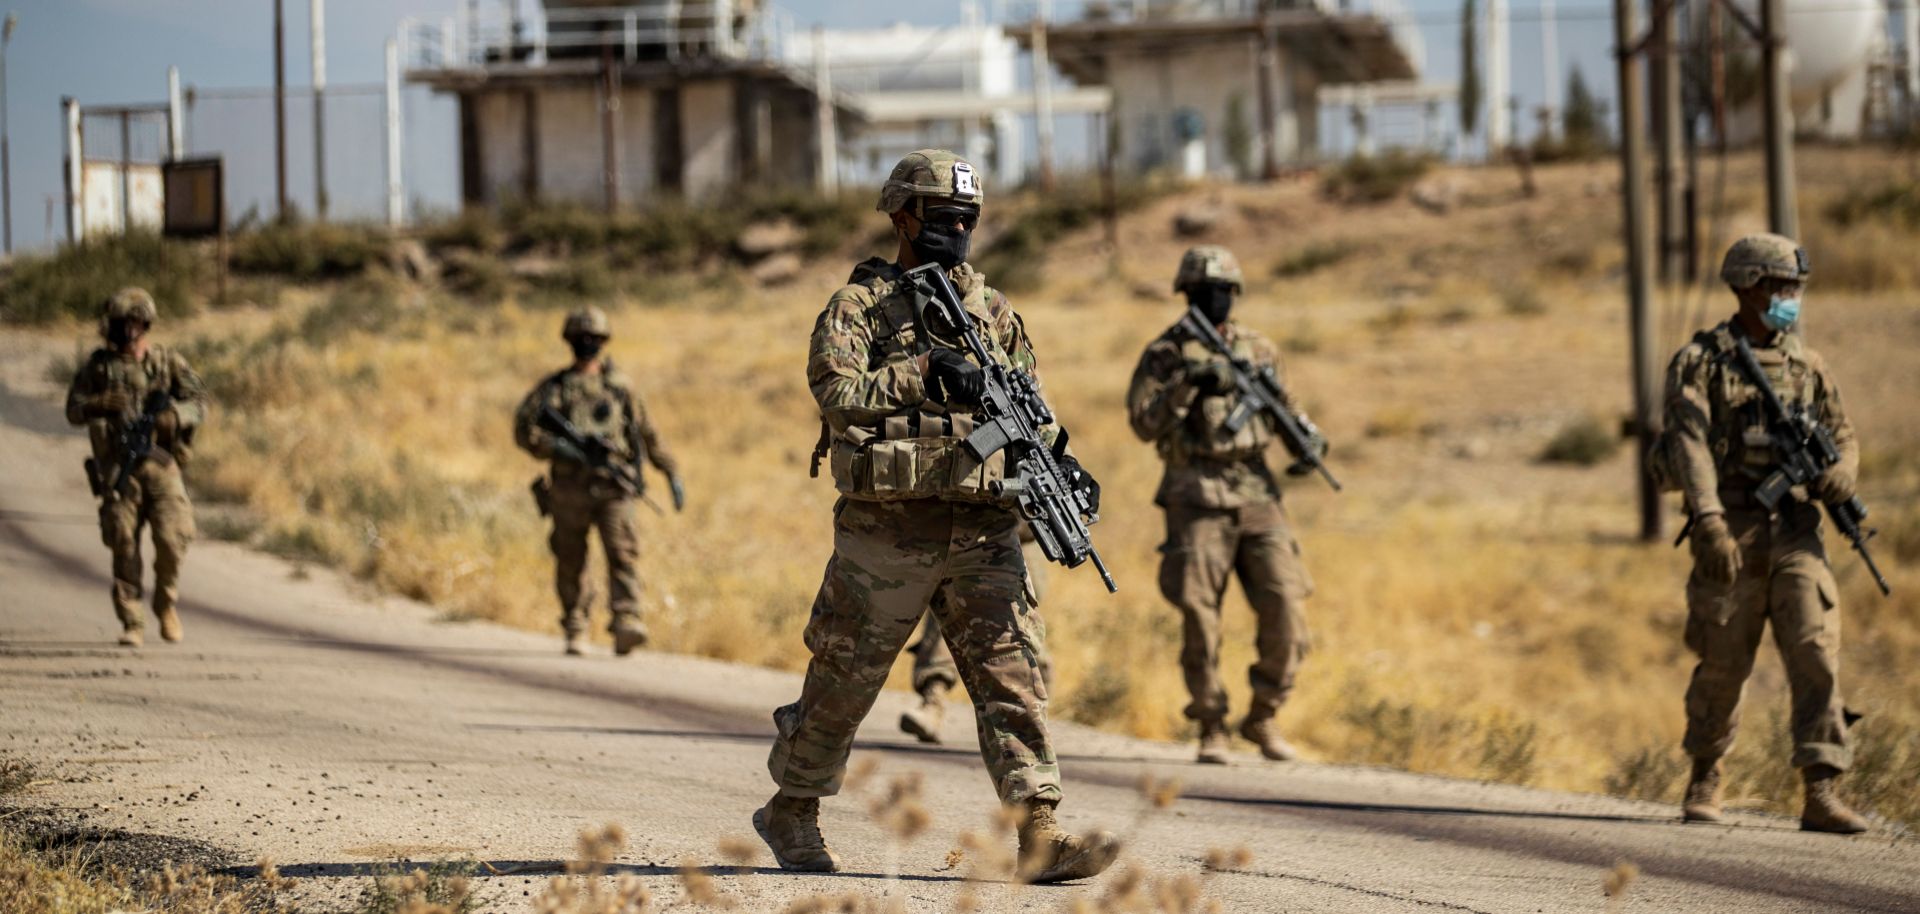 U.S. soldiers walk during a military patrol near an oil production facility in the countryside of northeastern Syria on Oct. 27, 2020. 